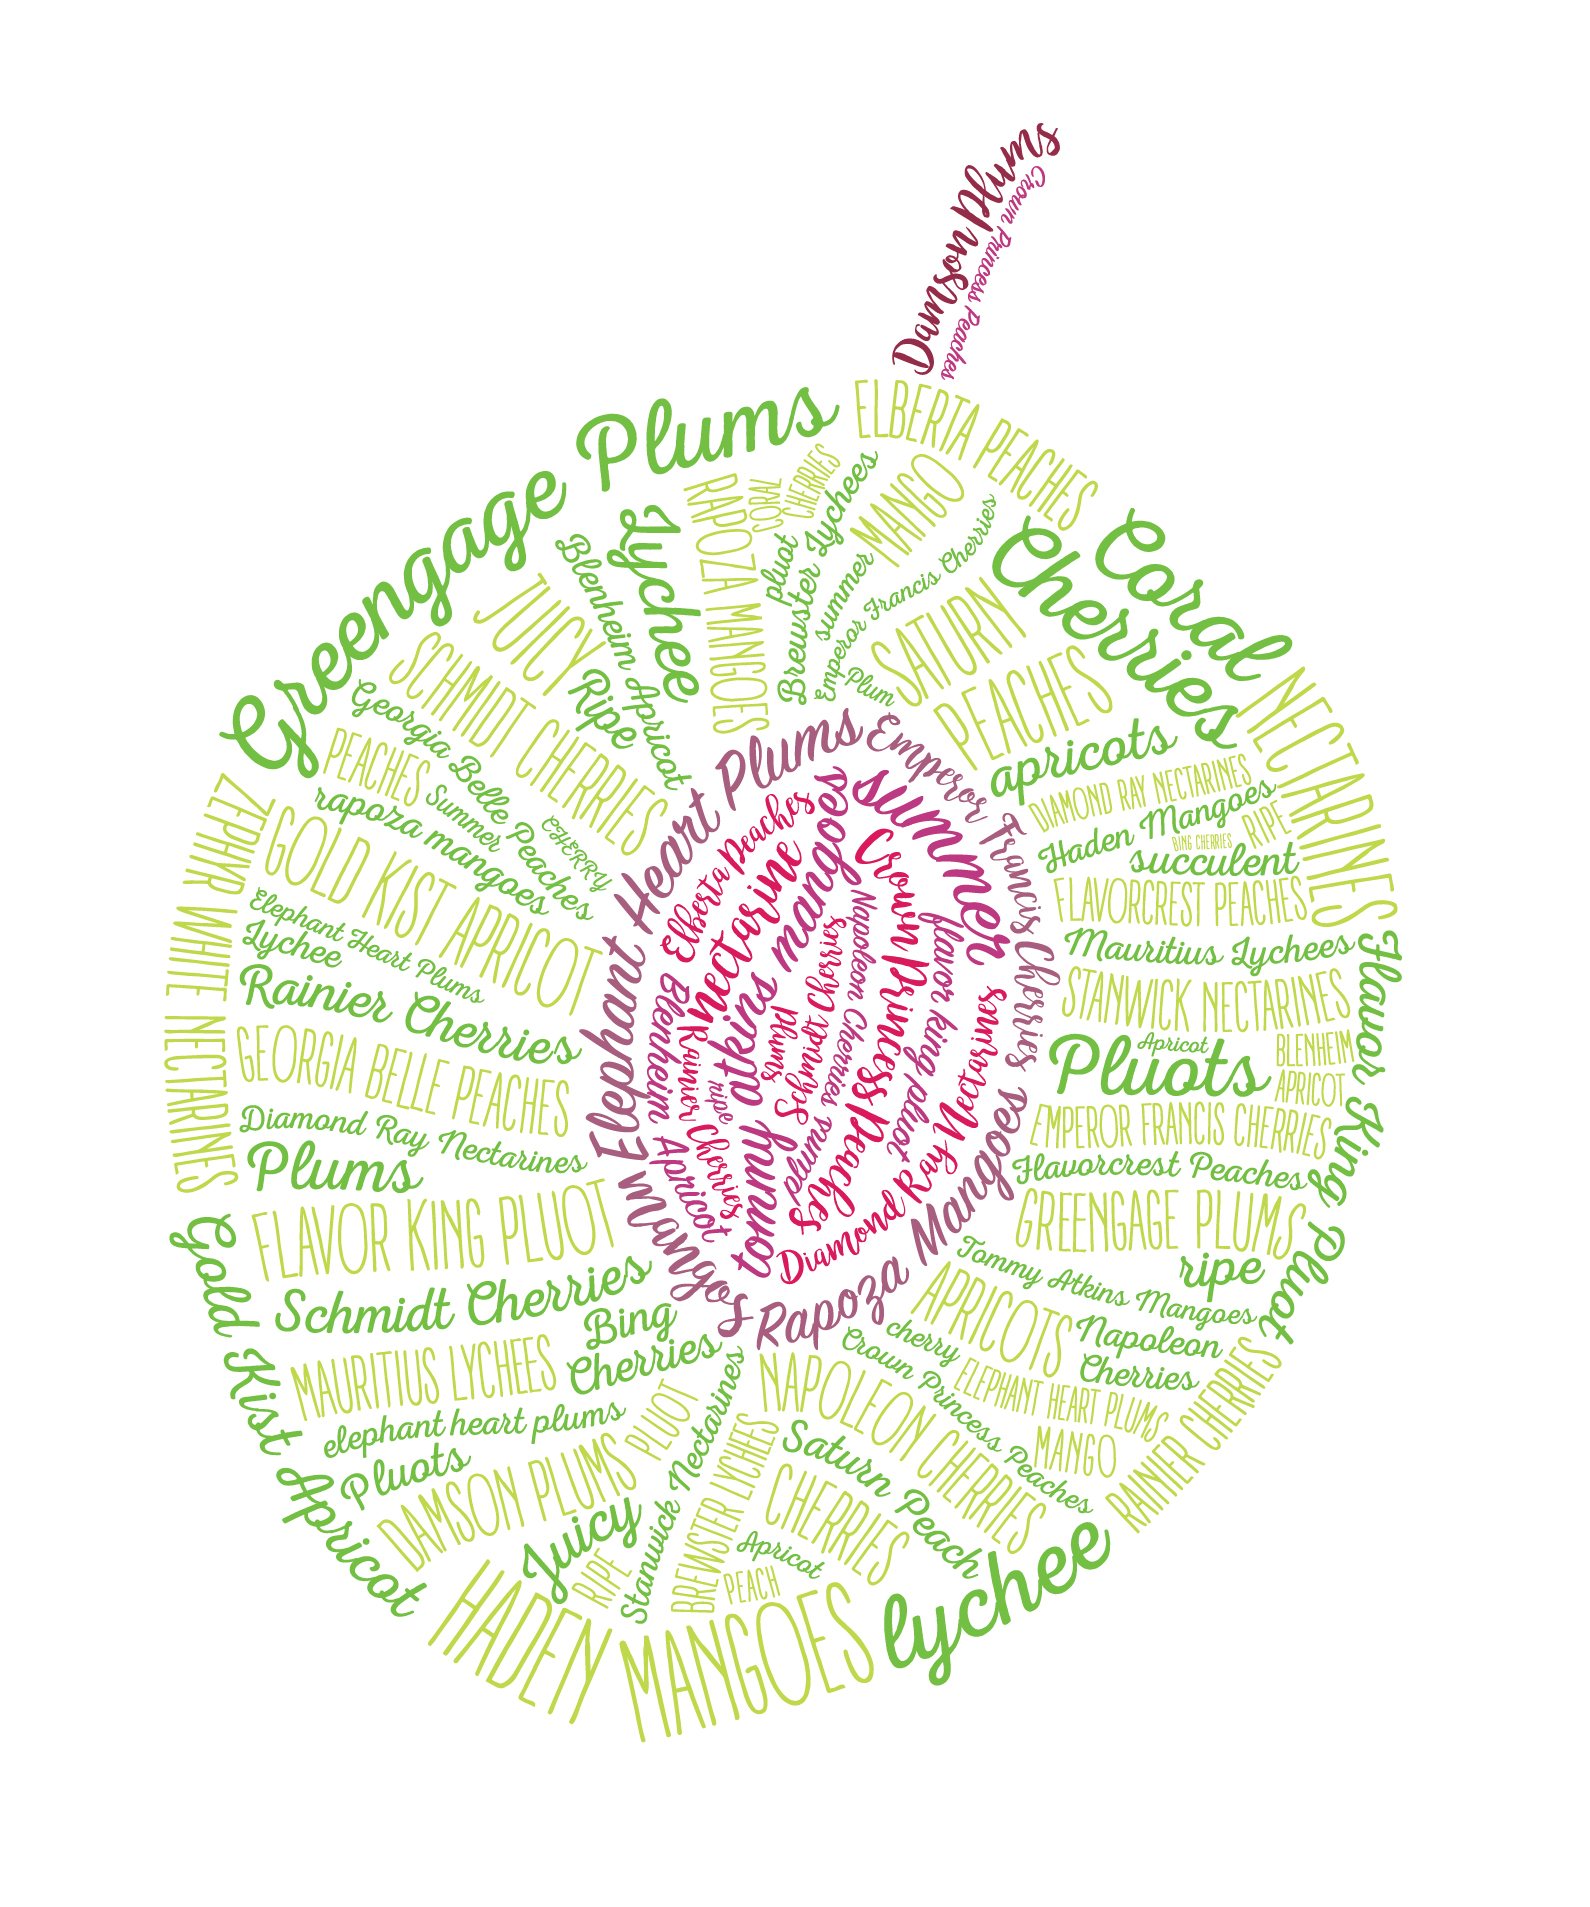  Custom word cloud in the shape of a plum celebrating the many varieties of stone fruit 